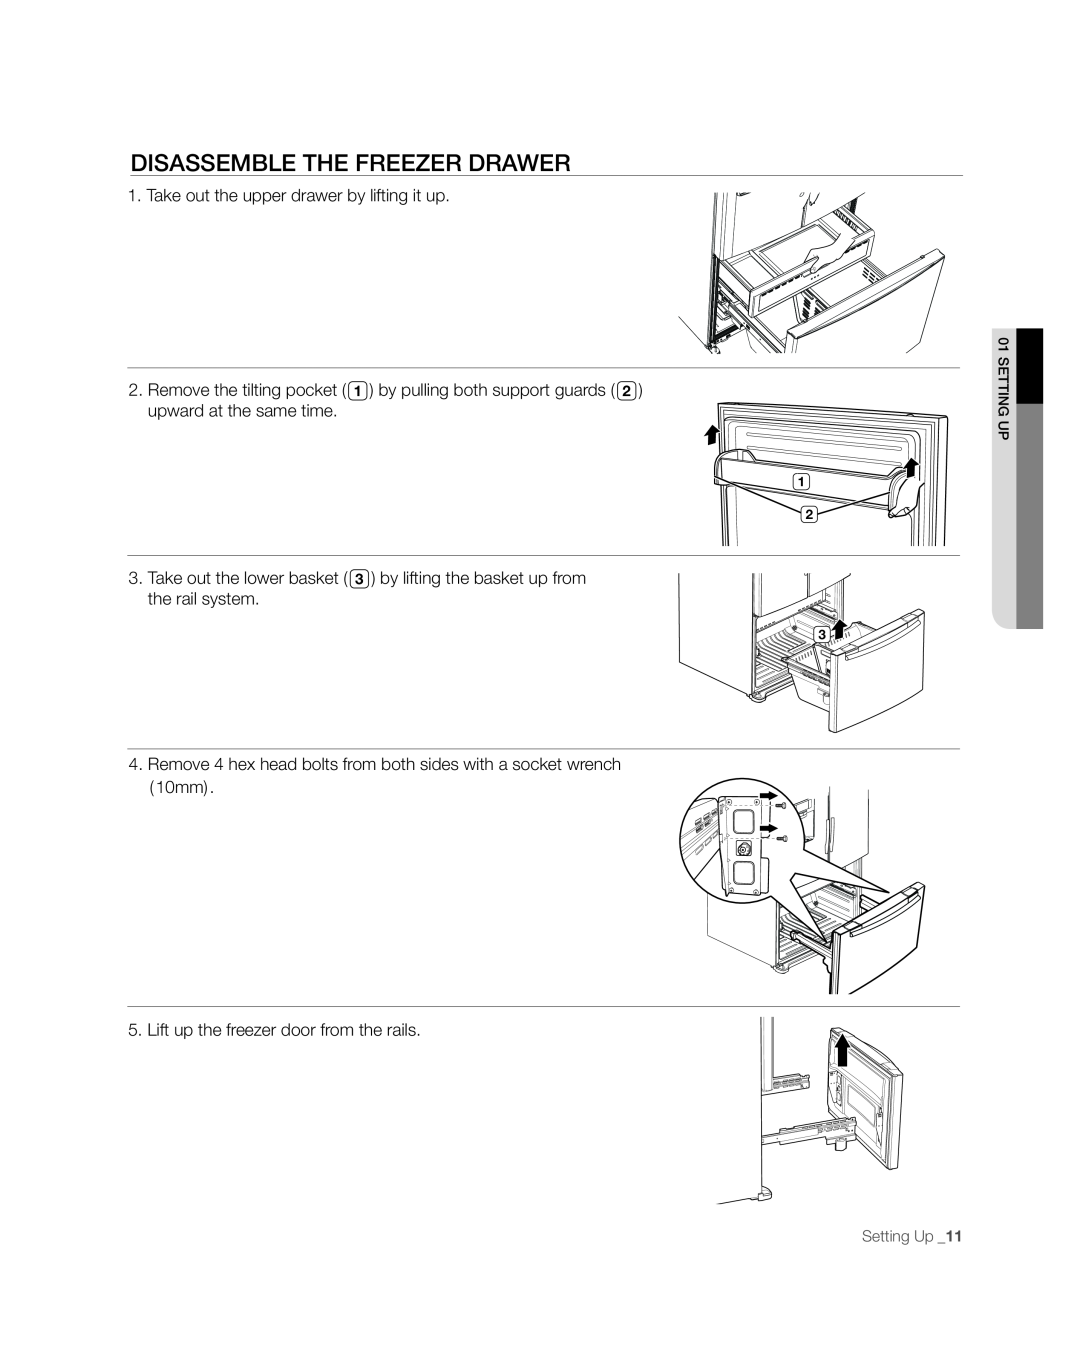 Samsung RFG237, RFG238AARS disassemble the freezer drawer, Take out the upper drawer by lifting it up, Setting Up 